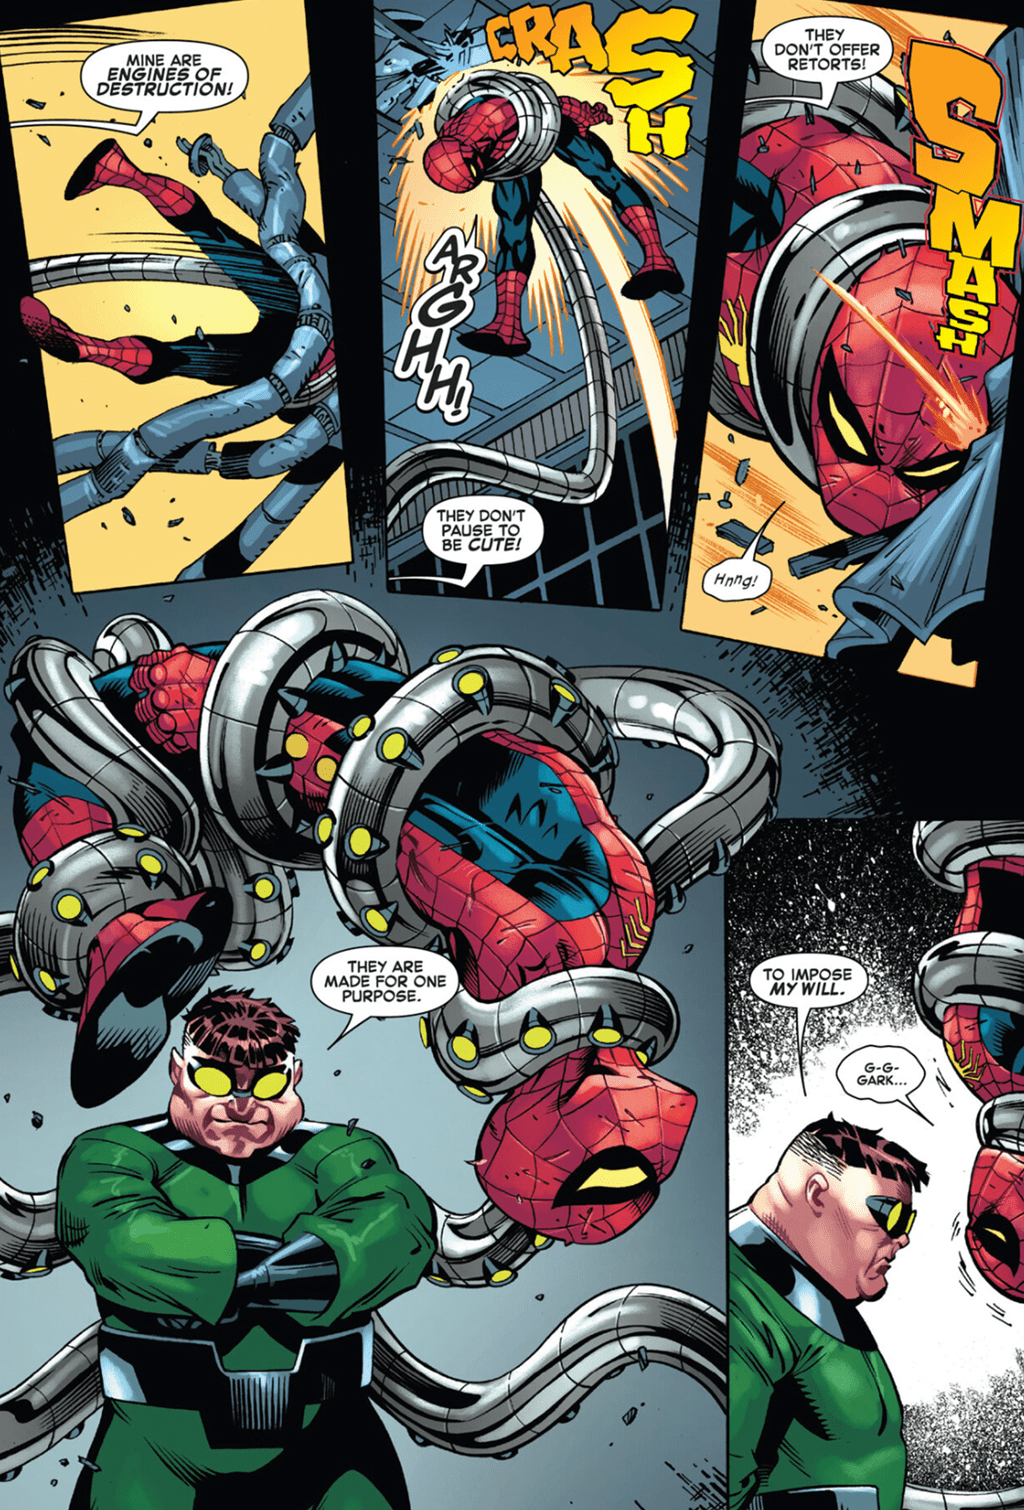 Spider-Man vs Doctor Octopus. Is this rivalry one of your